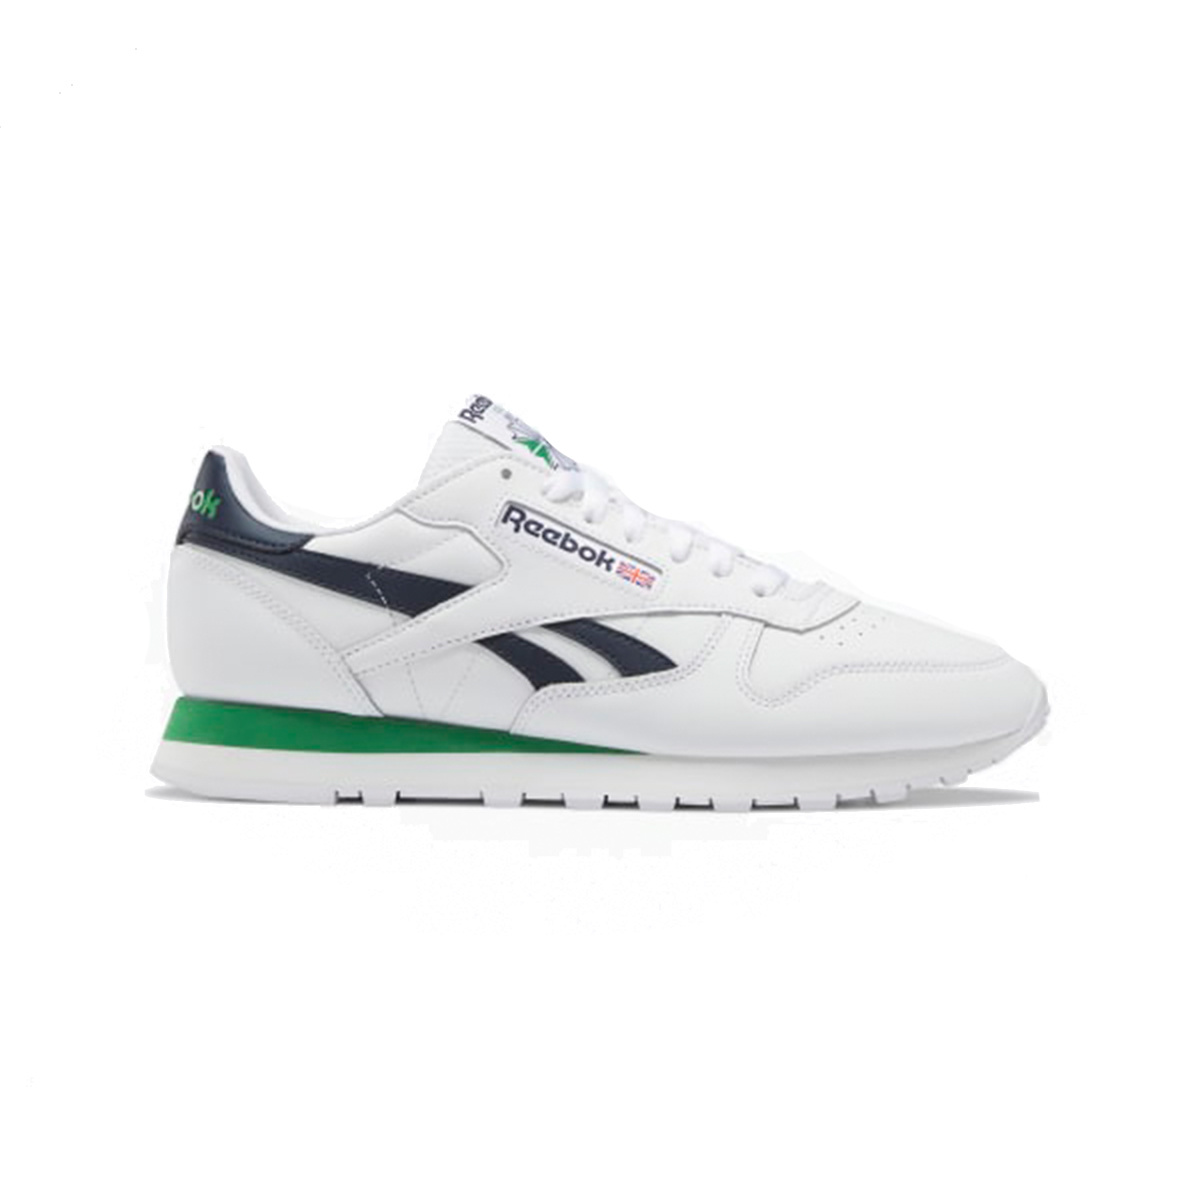 Reebok Classic Leather (Cloud White/Vector Navy/Glen Green) GY9748